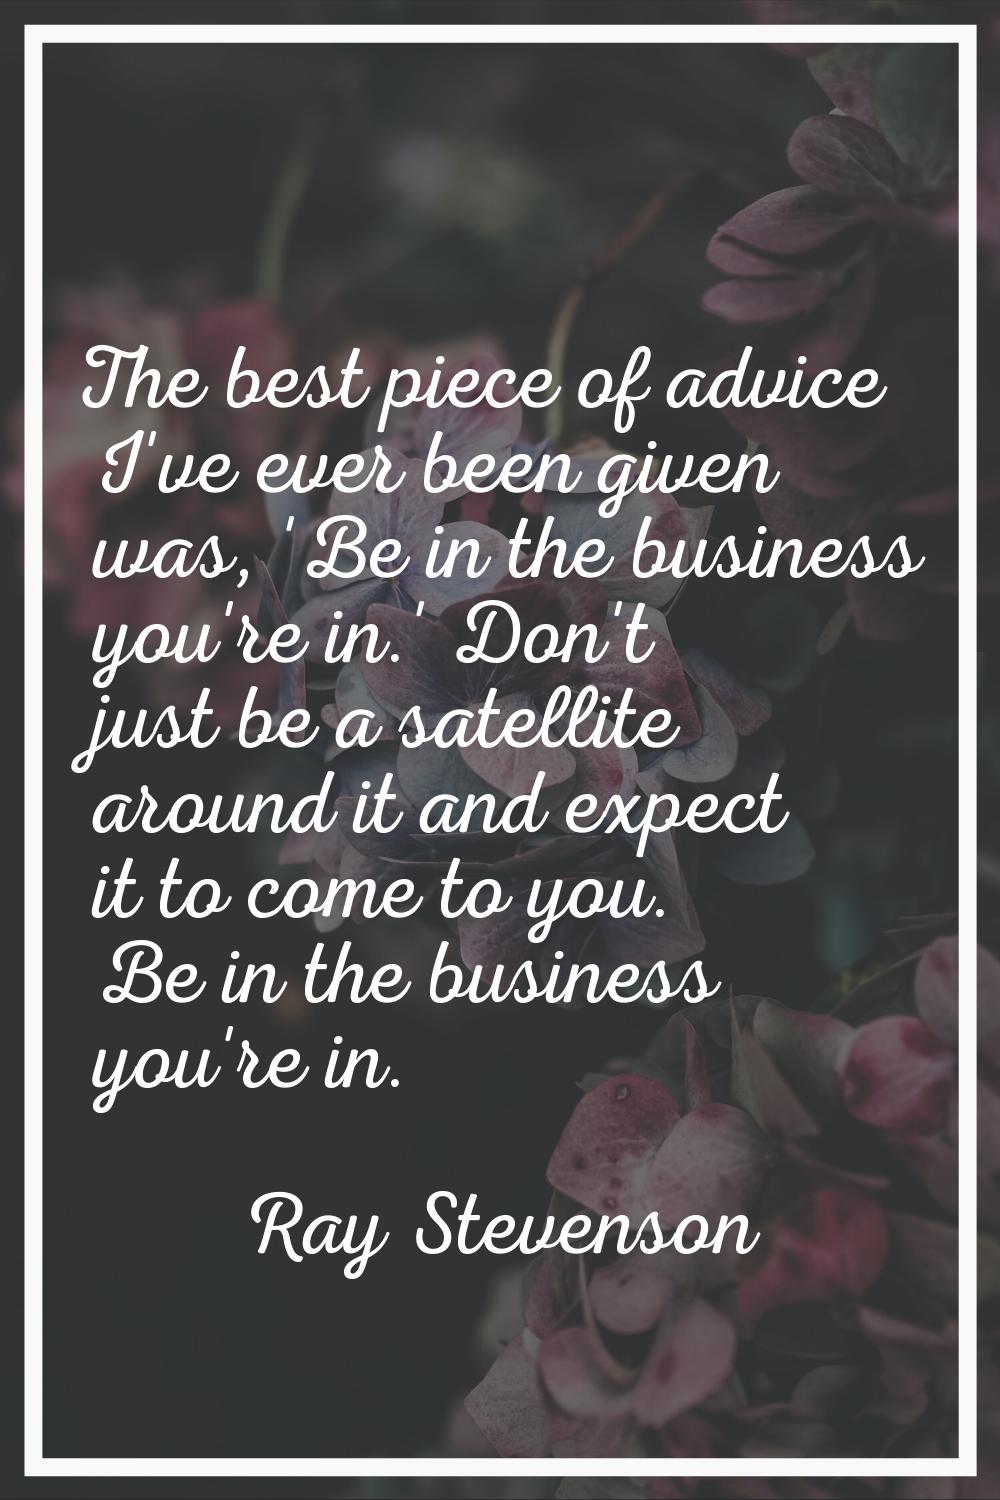 The best piece of advice I've ever been given was, 'Be in the business you're in.' Don't just be a 